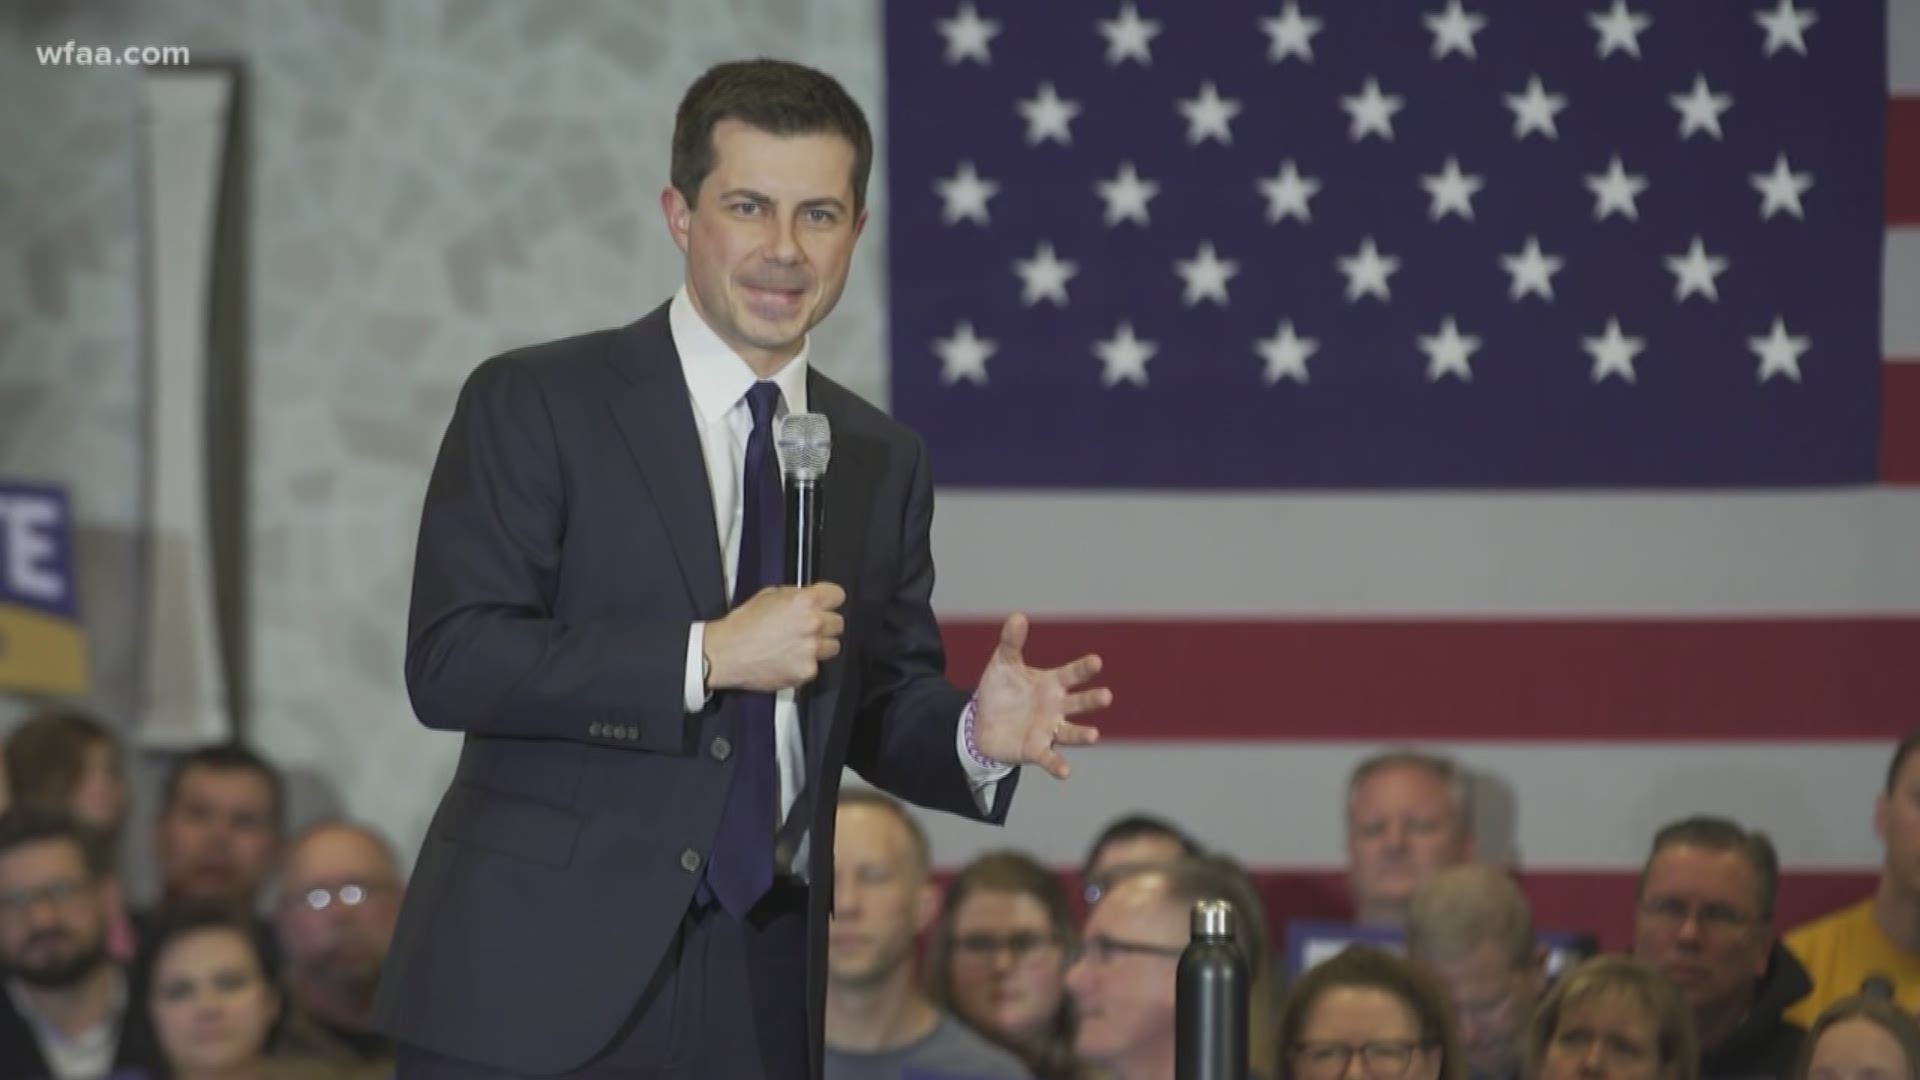 Buttigieg made the case to his supporters that it’s time for a younger generation of Democrats to take the lead in the party.